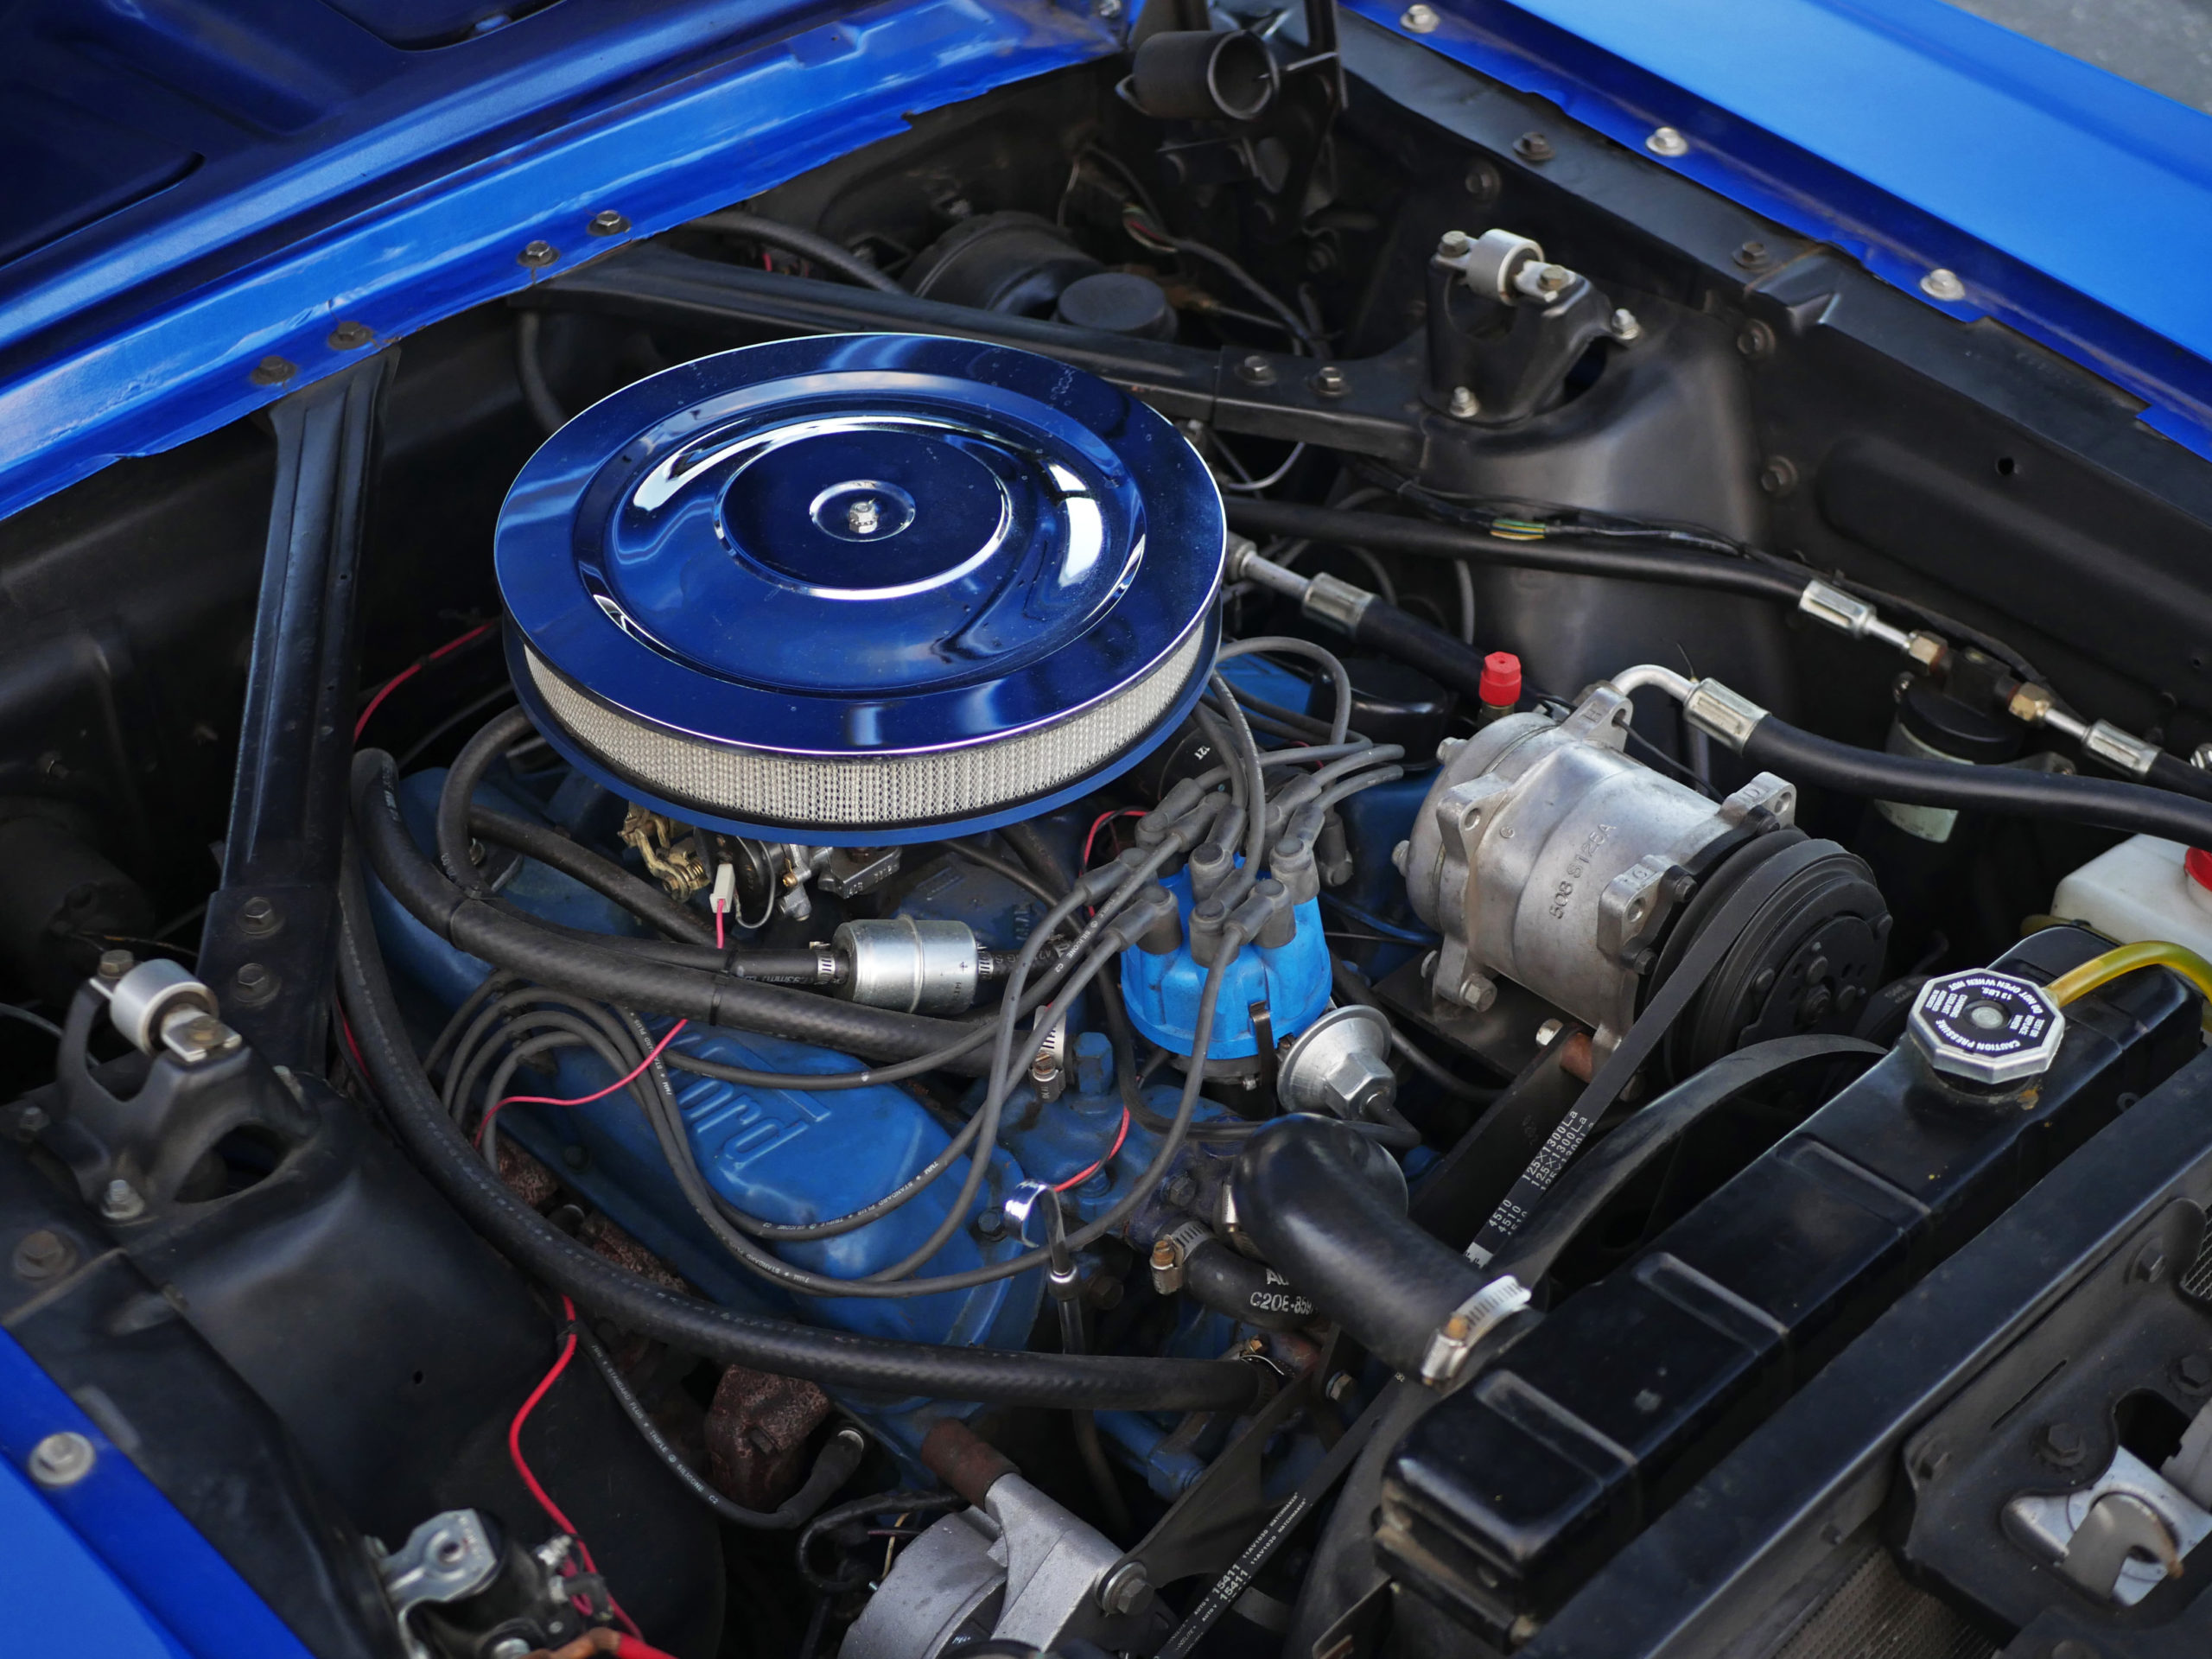 1965-ford-mustang-gt-engine-monterey-touring-vehicles